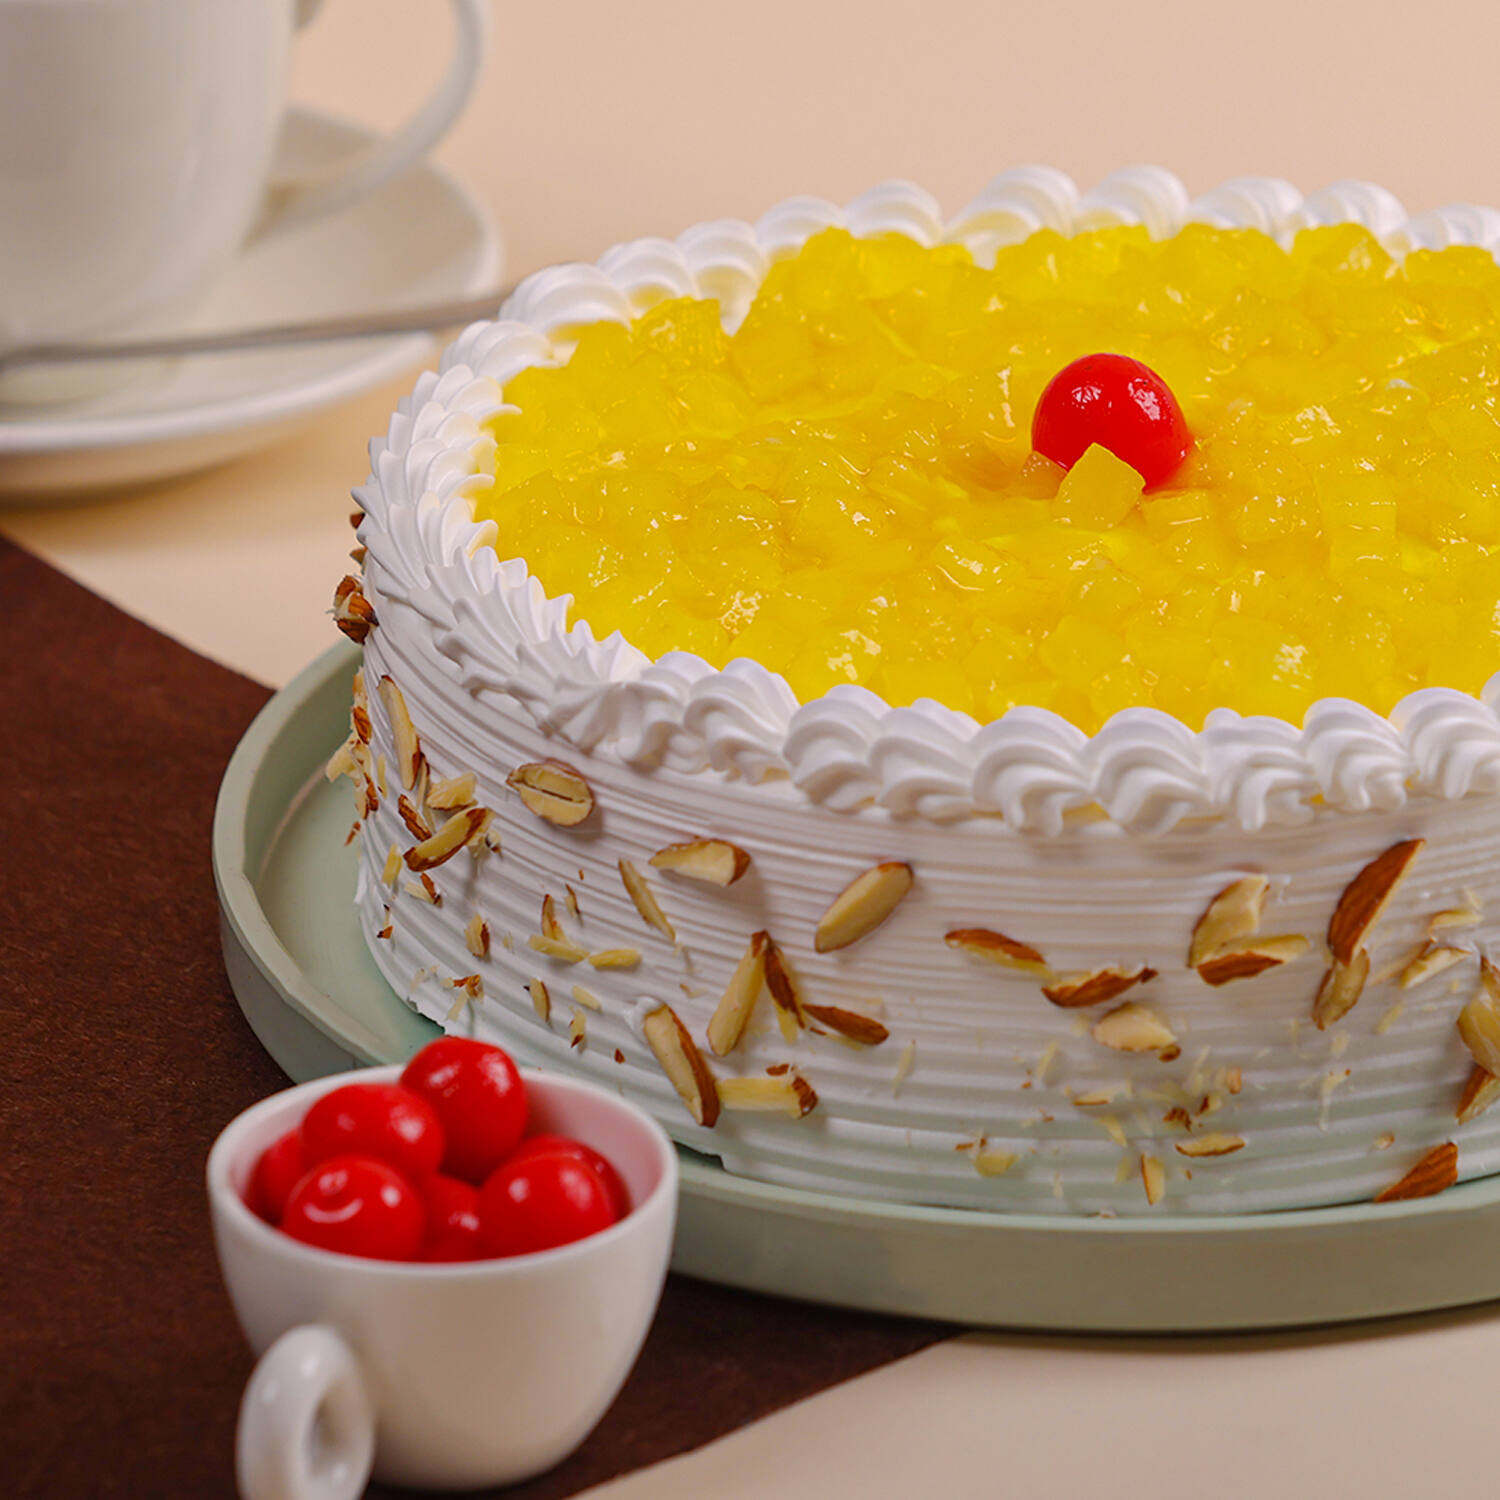 Pineapple Sunshine Cake - Gonna Want Seconds